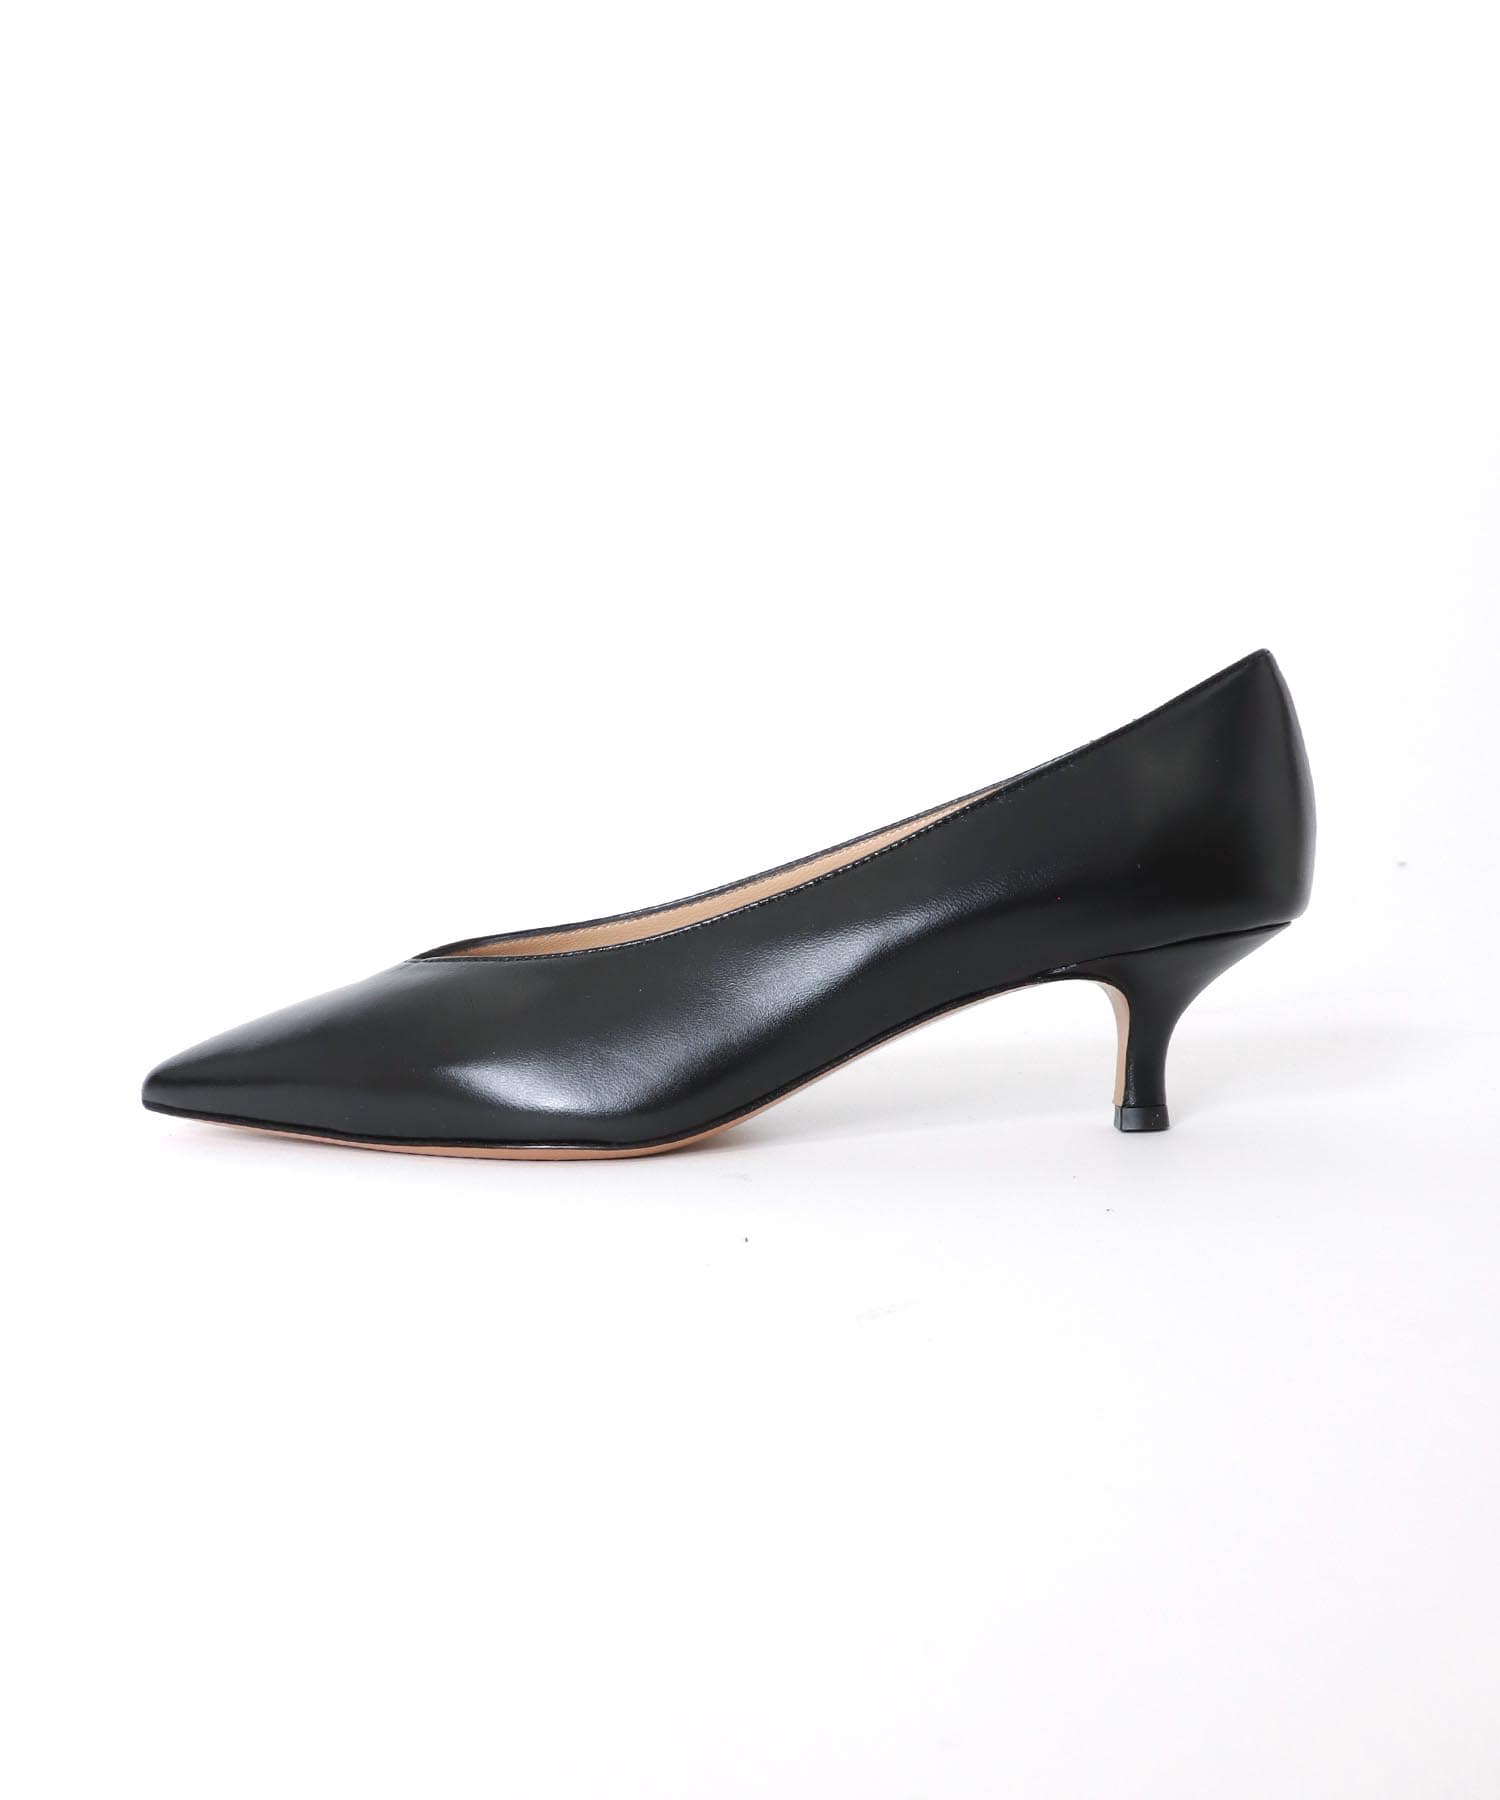 FABIO RUSCONI＞GABRY pointed toe pumps | AND ON JIONE STORE